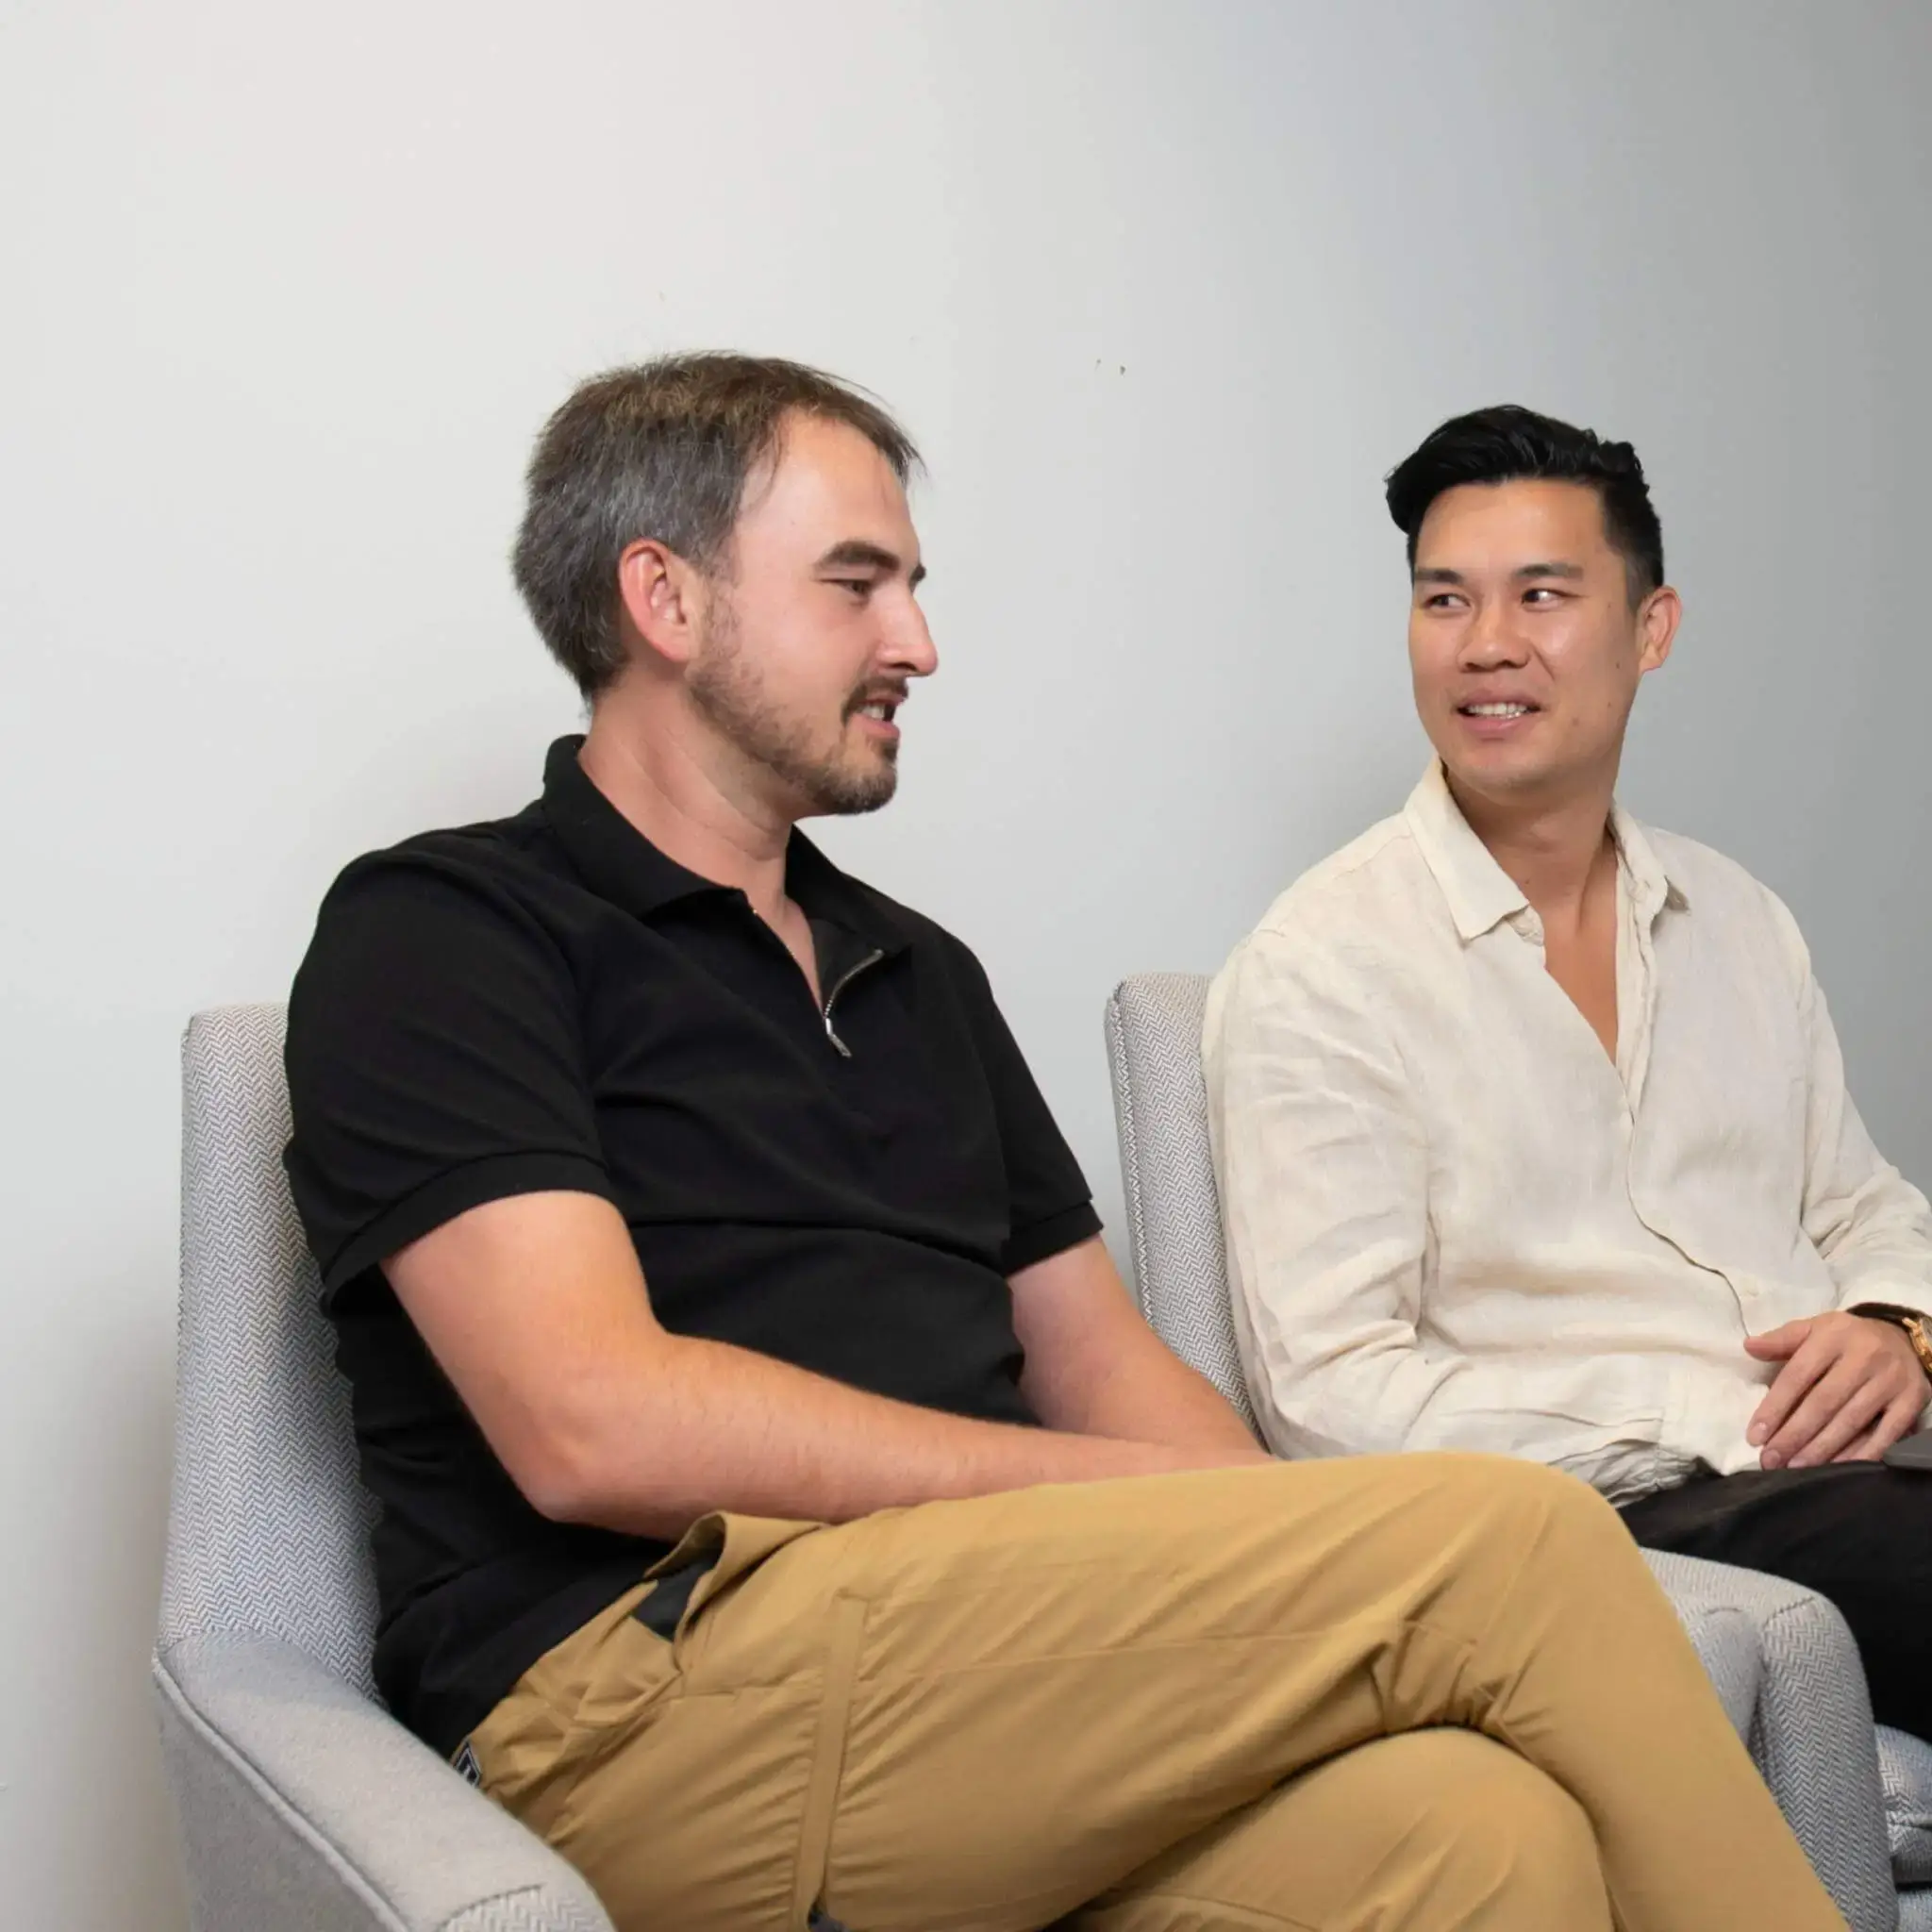 Feature-rich Adobe Commerce accelerator, two people sitting and chatting in the office